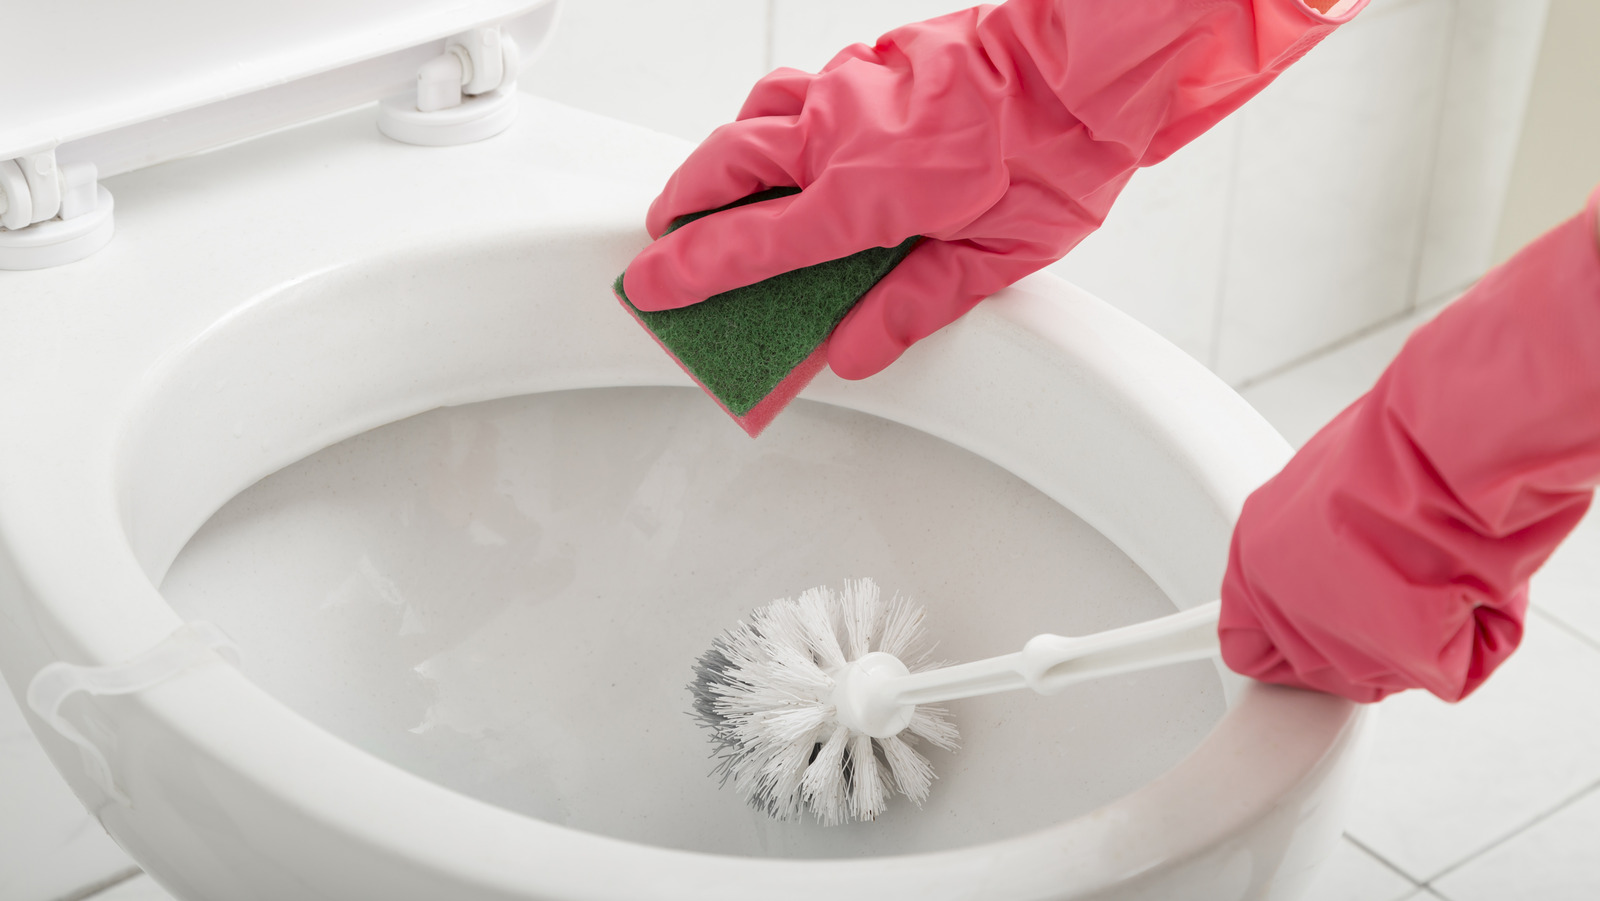 https://www.housedigest.com/img/gallery/the-simple-hack-that-will-keep-your-toilet-brush-from-dripping-on-your-bathroom-floor/l-intro-1674472332.jpg